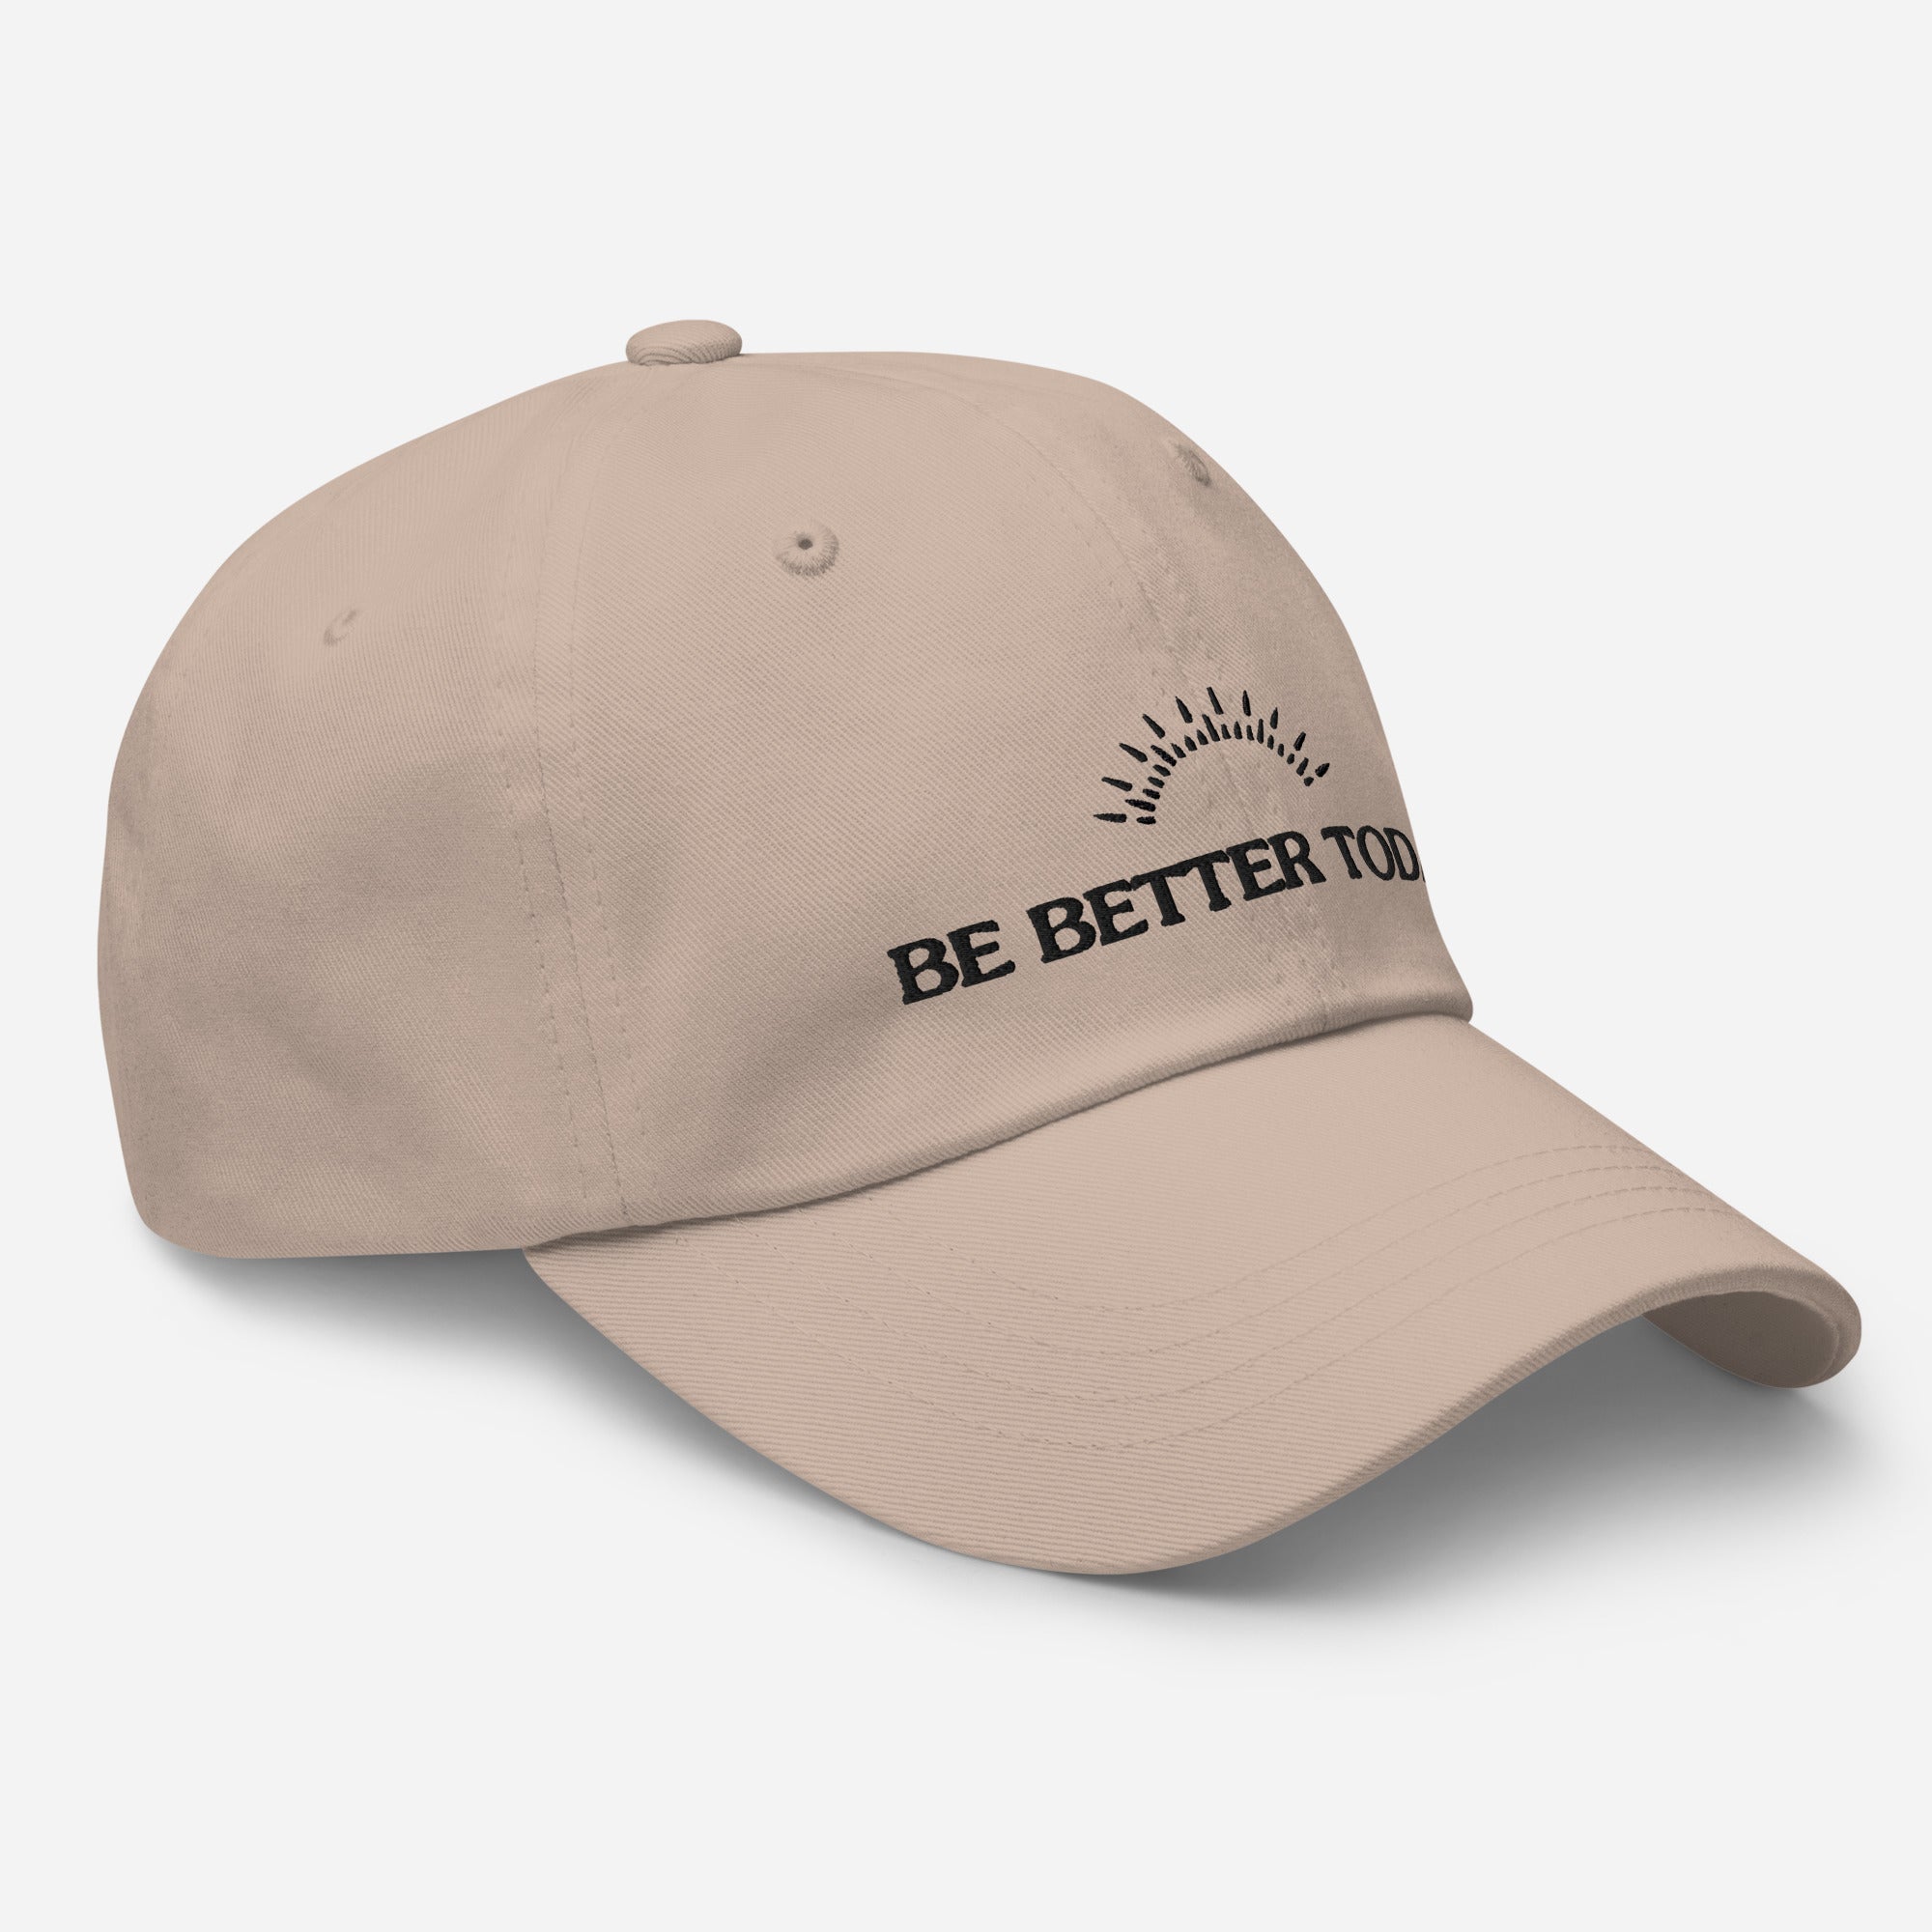 Be Better Today Hat